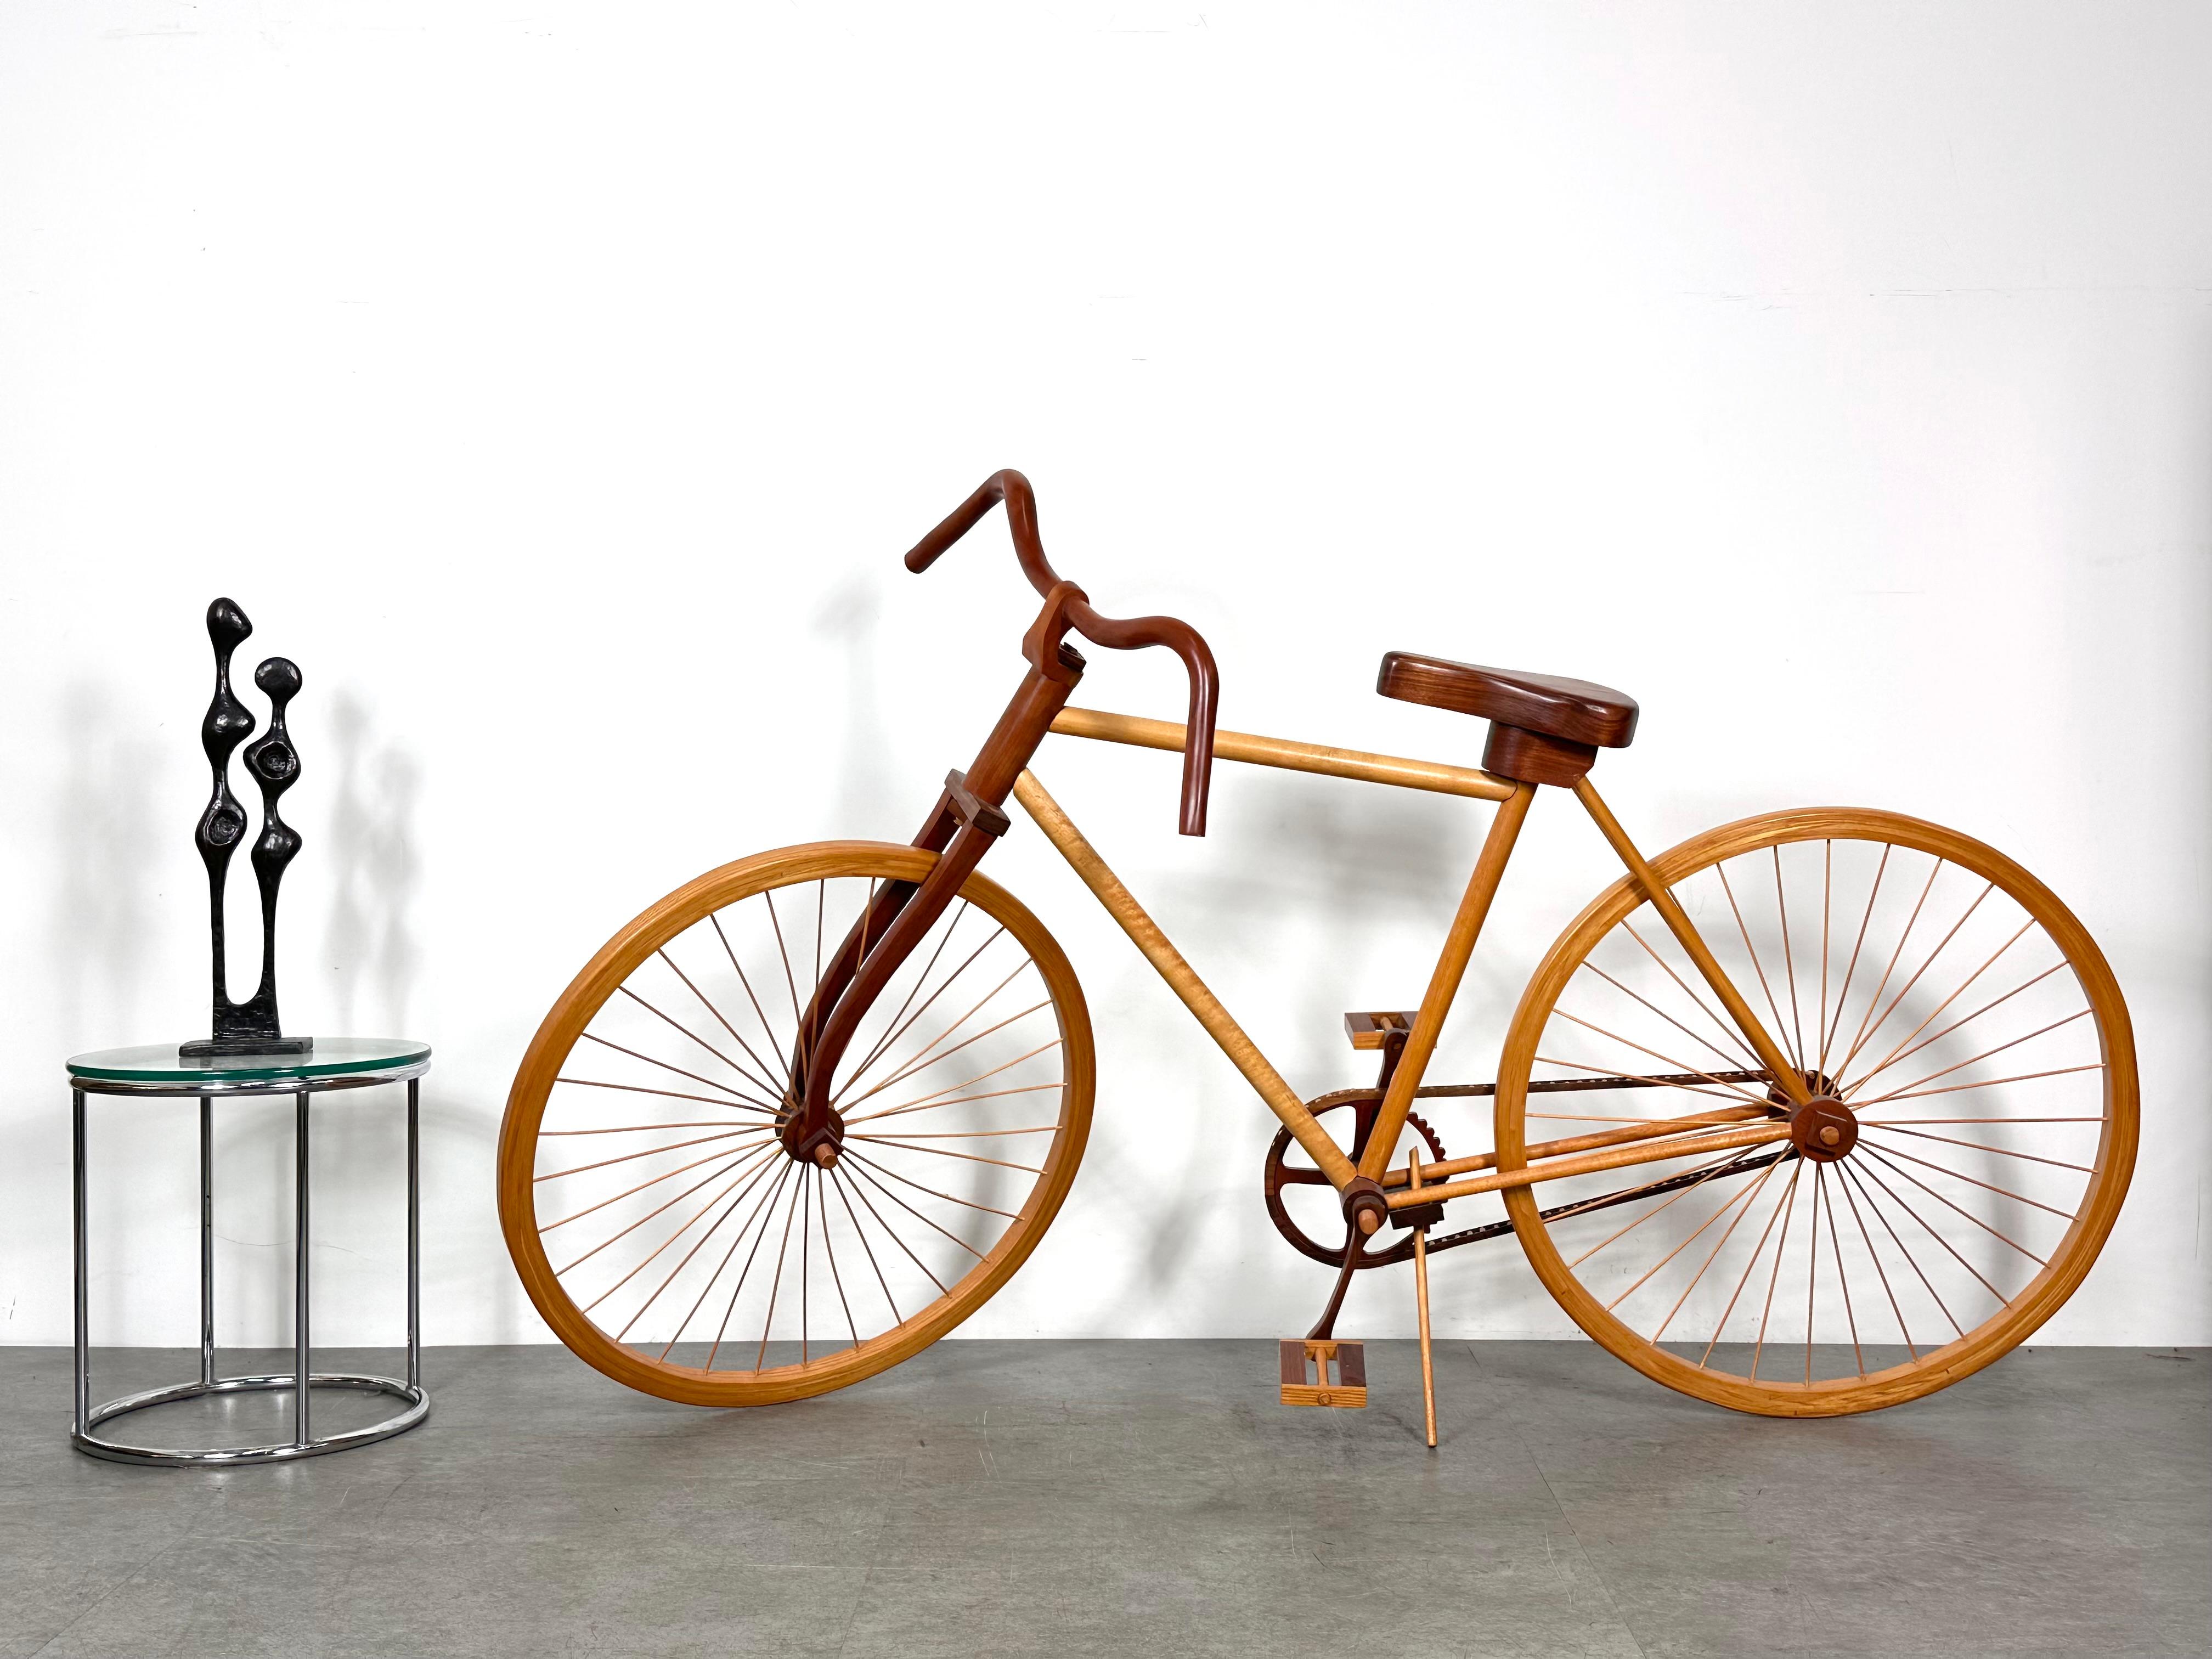 Modern American Studio Craft Life Size Wooden Bicycle Sculpture Artist Signed 1988 For Sale